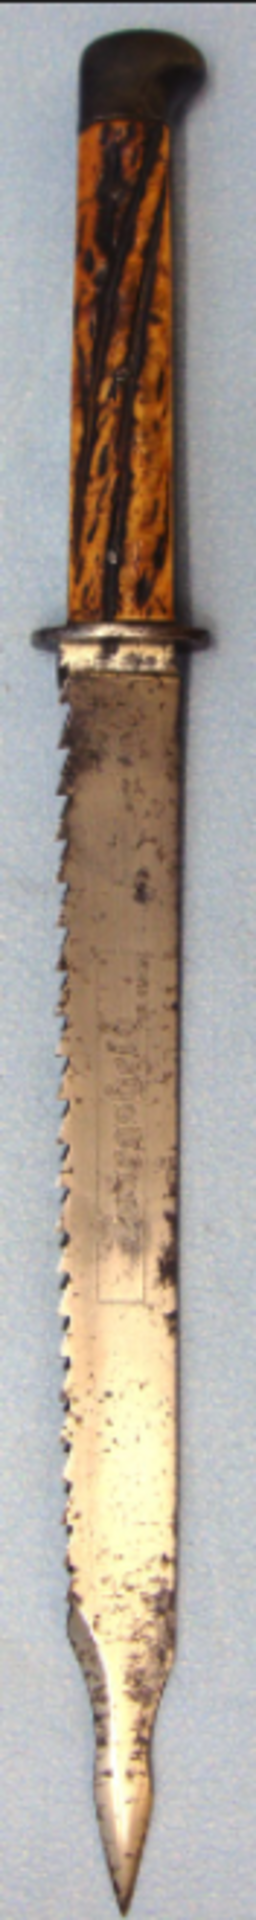 Very Rare WW1 German Presentation Trench Knife with 9" Sawback Blade & Flame Shaped Point - Image 3 of 3